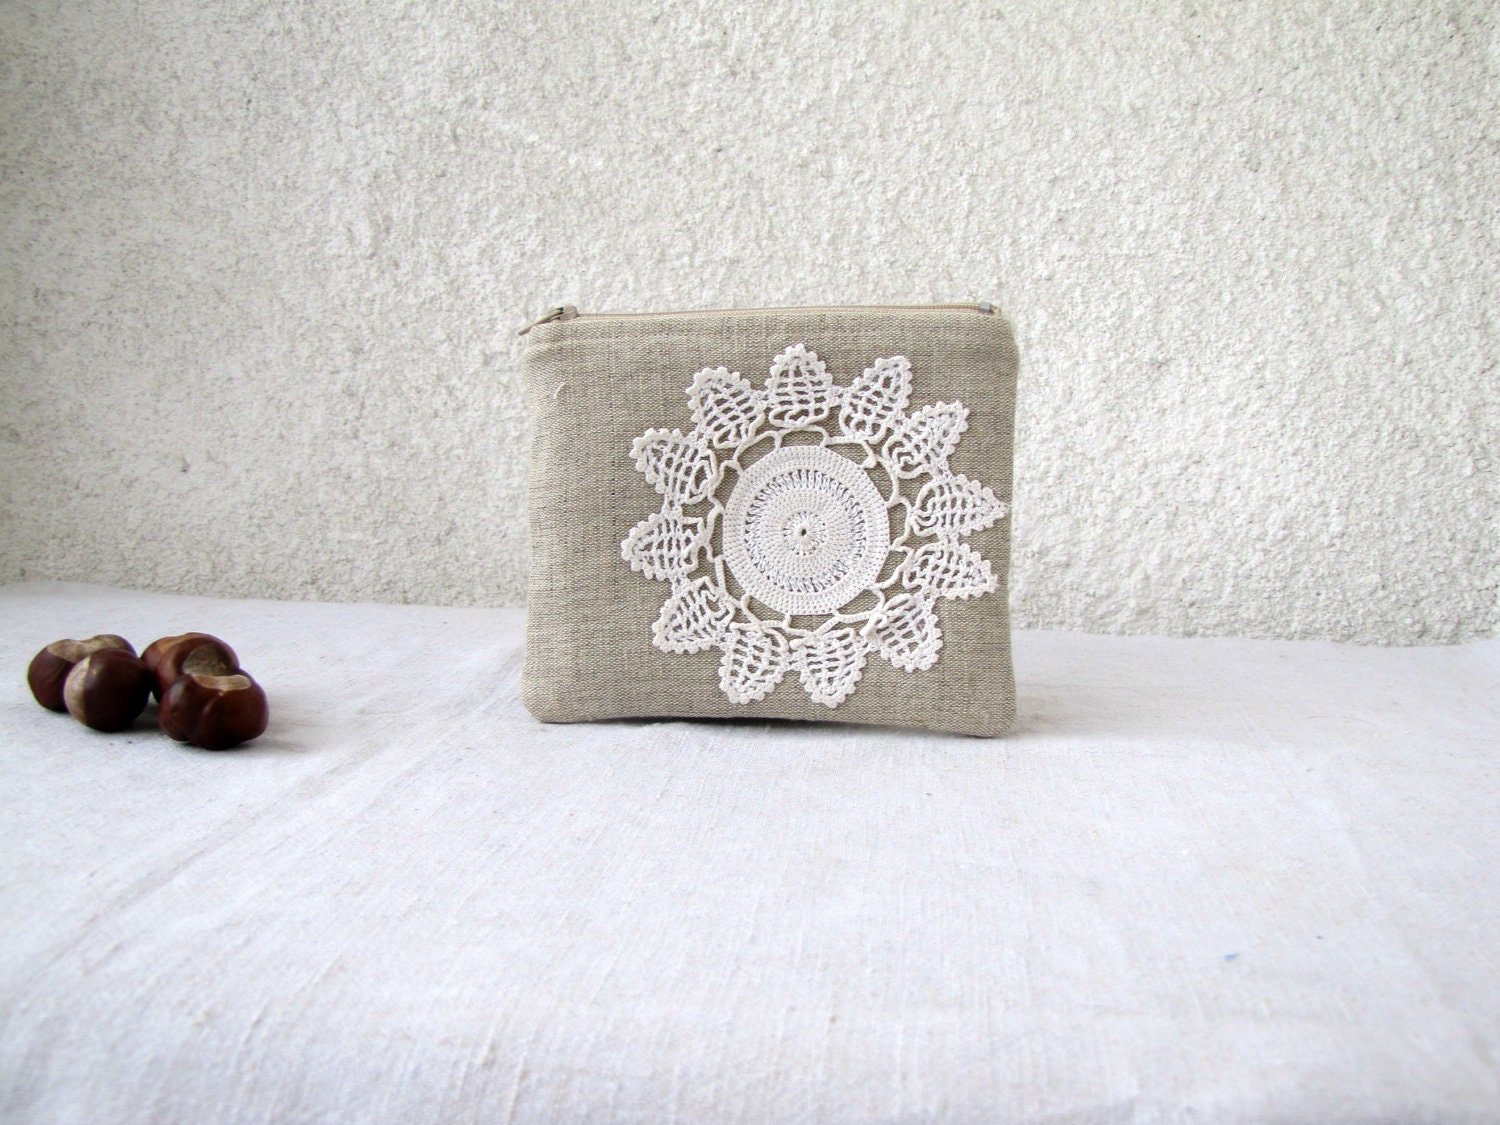 Cute little pouch  - natural linen and vintage doily flower